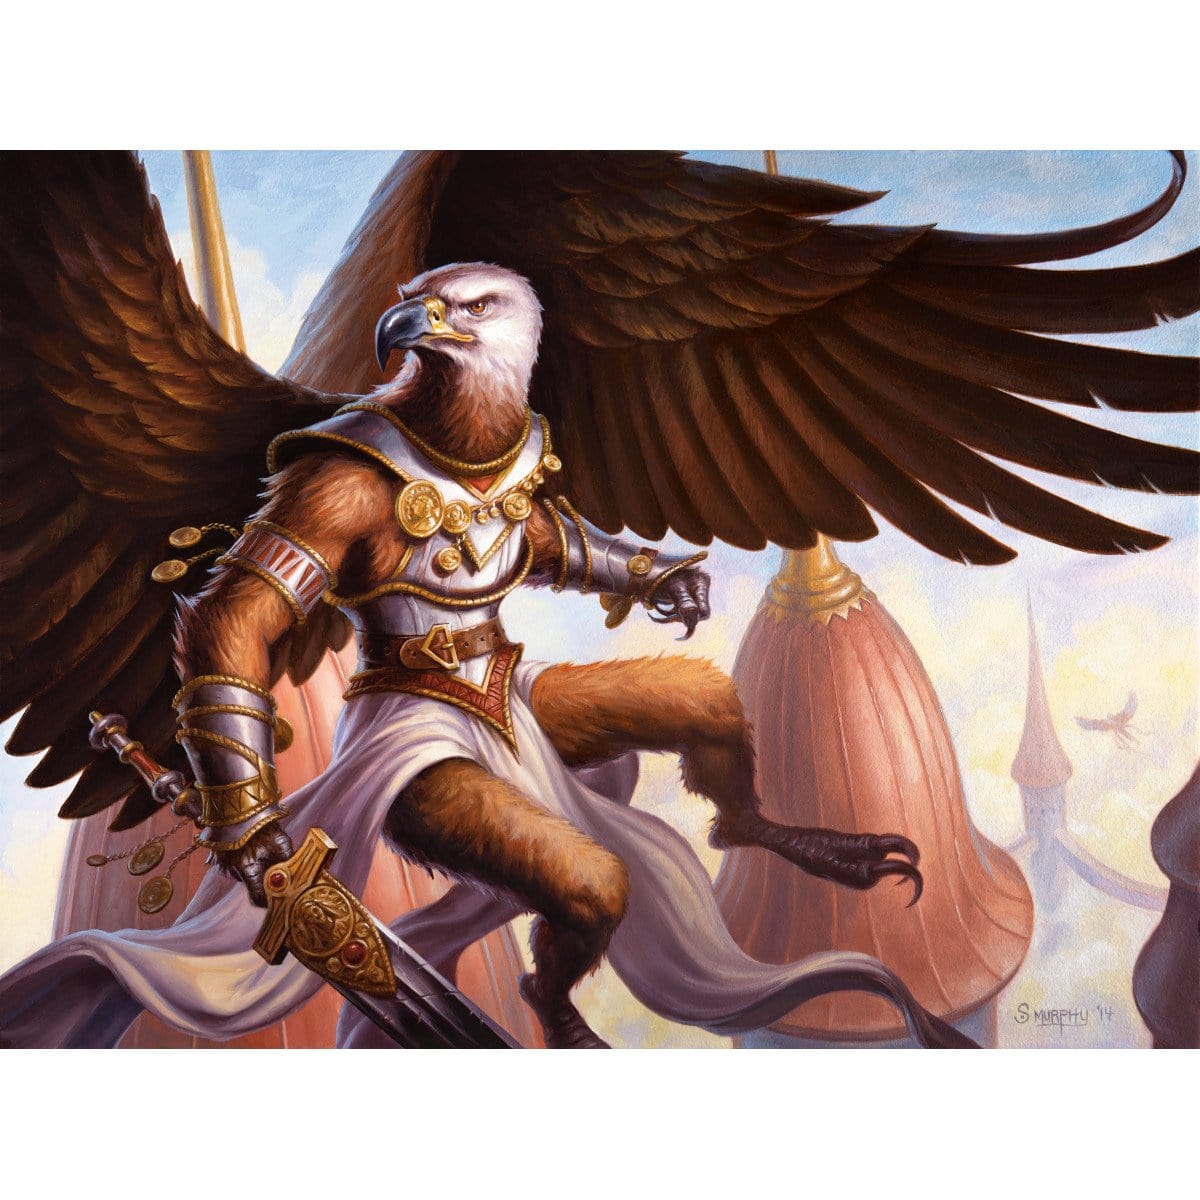 Stalwart Aven Print - Print - Original Magic Art - Accessories for Magic the Gathering and other card games